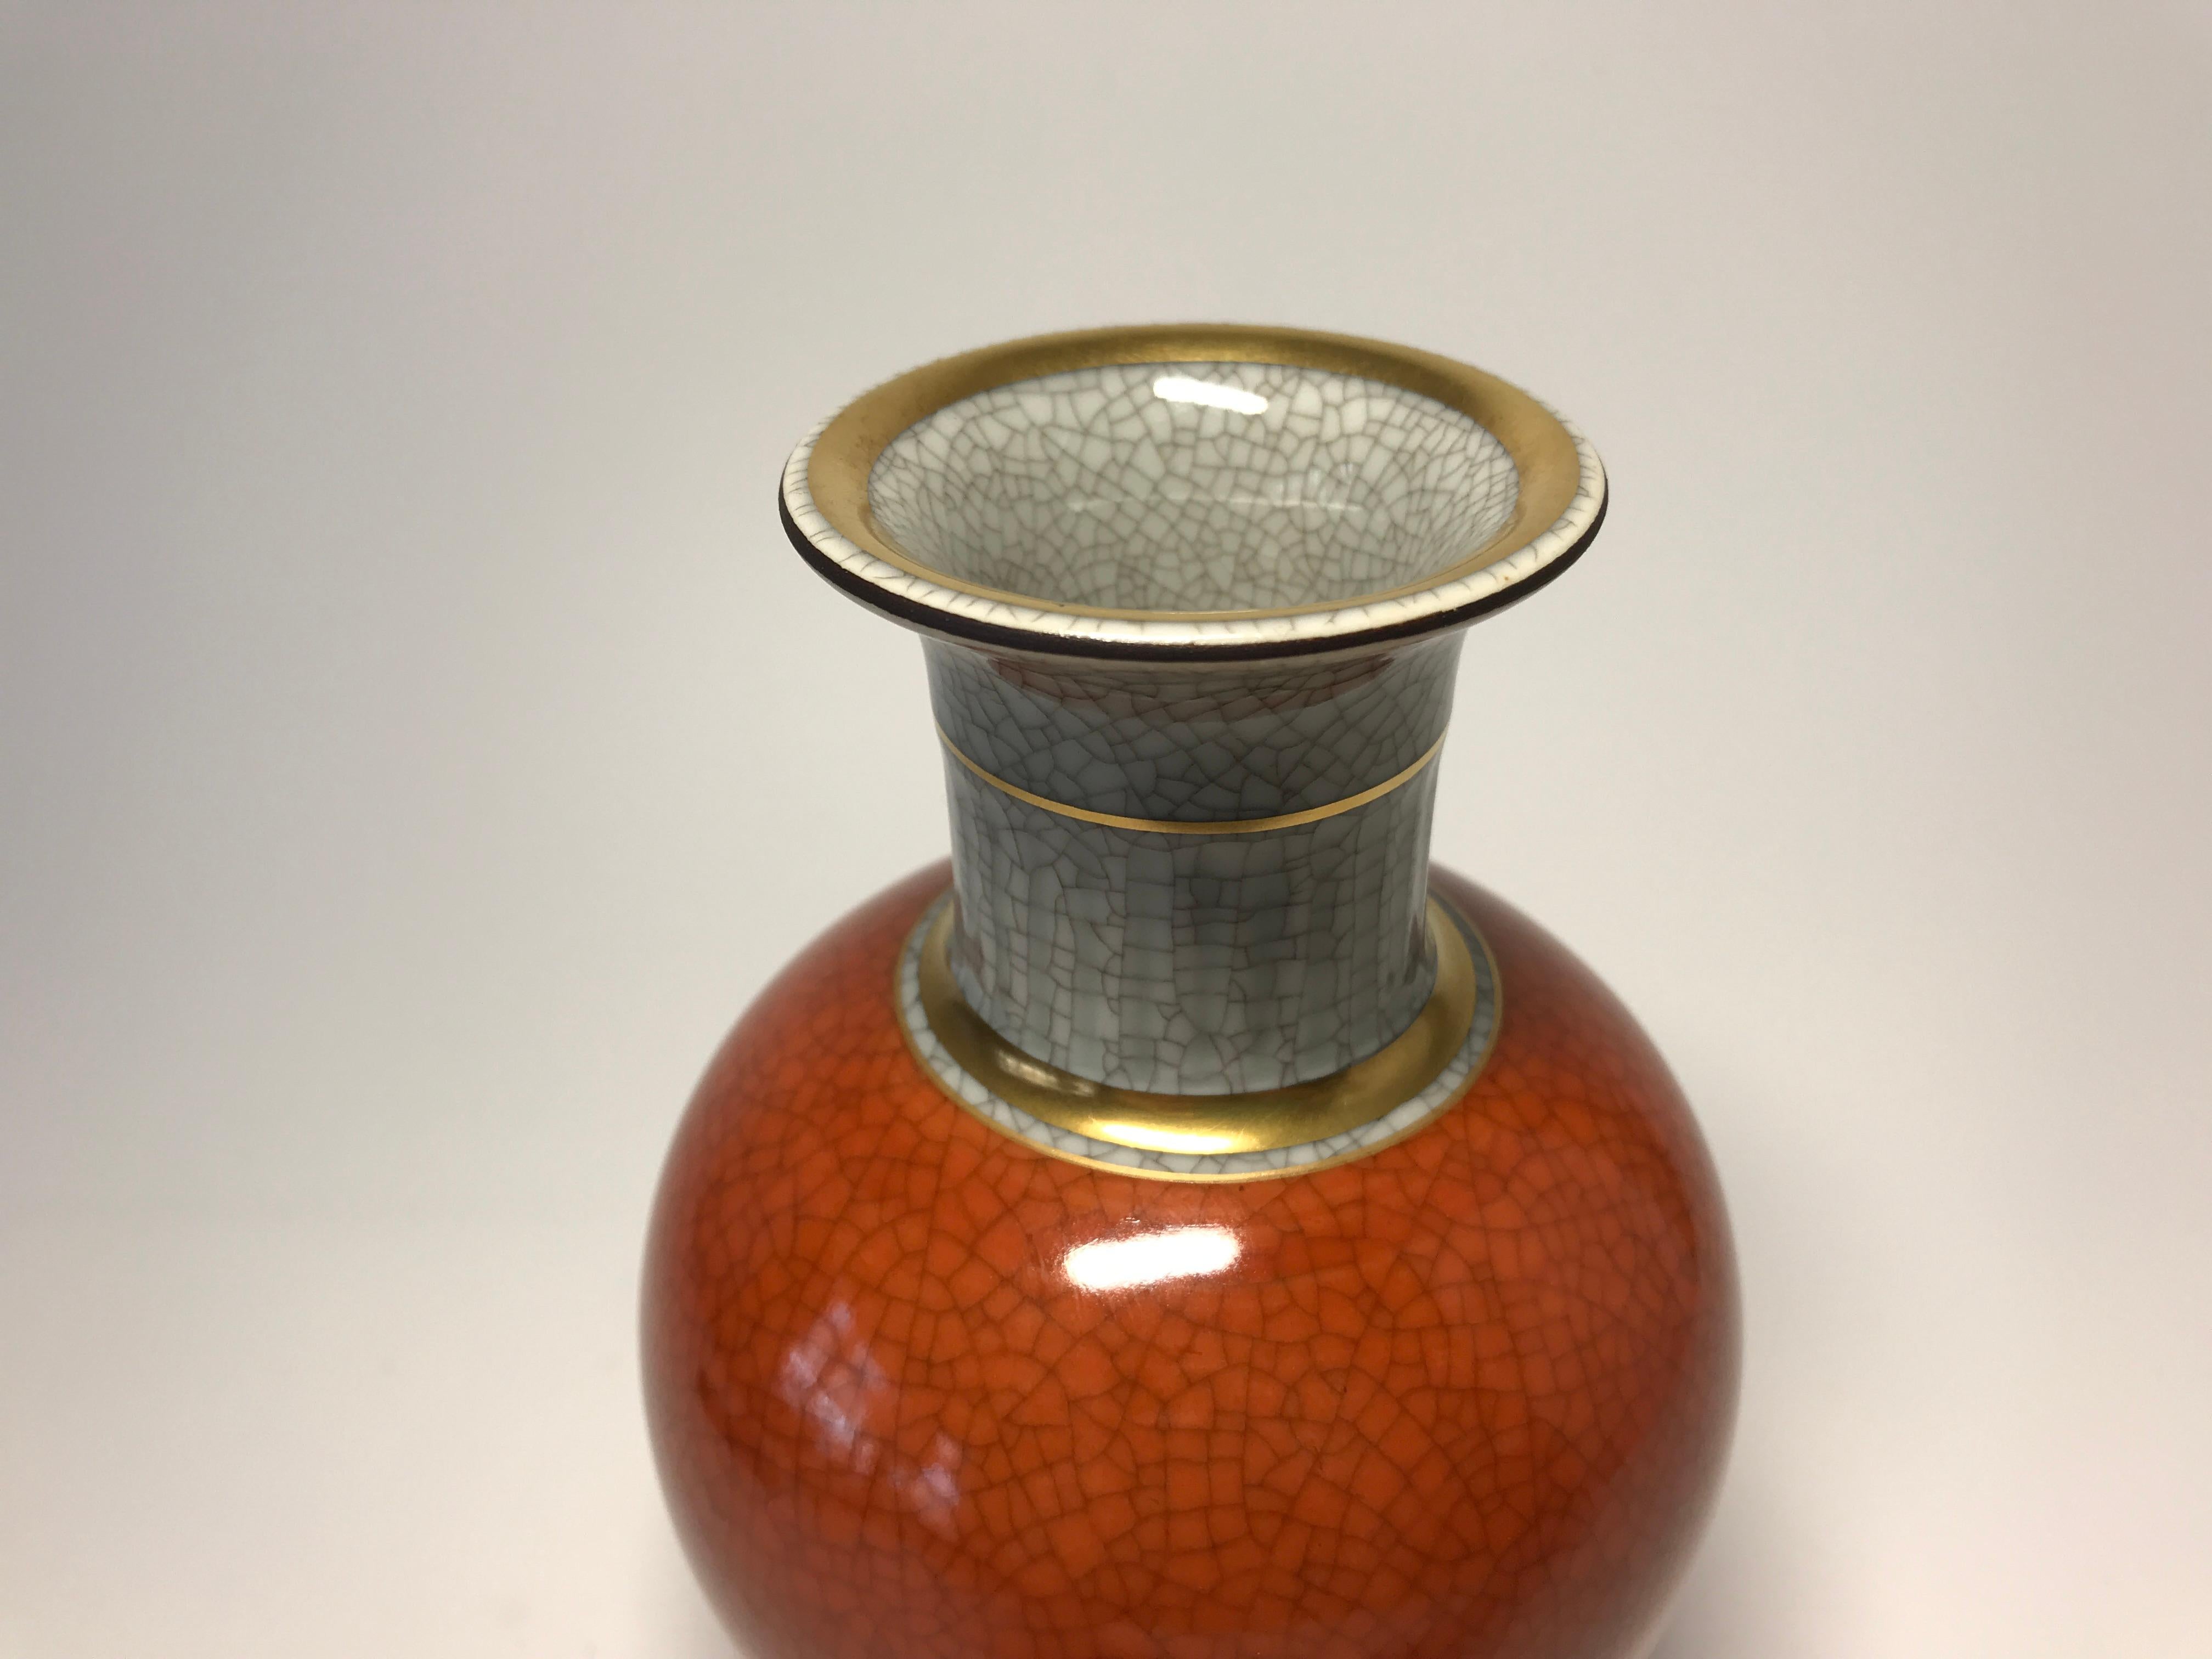 Thorkild Olsen for Royal Copenhagen porcelain terracotta and grey crackle vase with beautiful gilt banding on neck and base,
circa 1969-1973
Stamped and numbered 3033
Excellent example of Royal Copenhagen. Tiny underglaze spot on orange body (see